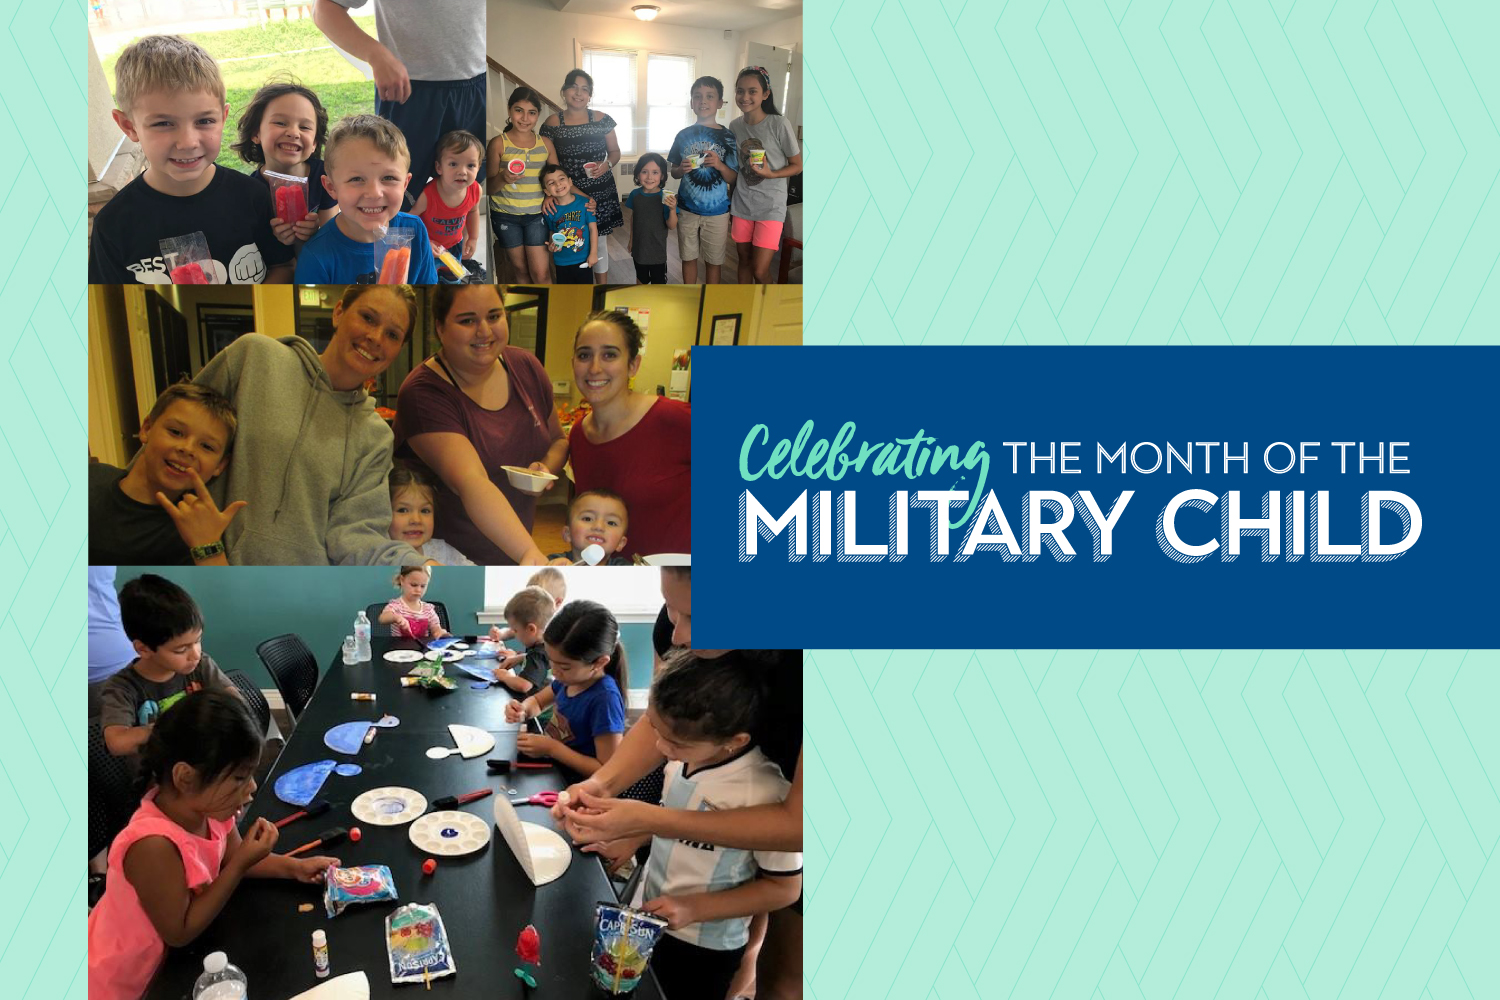 Balfour Beatty Communities celebrates Month of the Military Child  at bases across the country